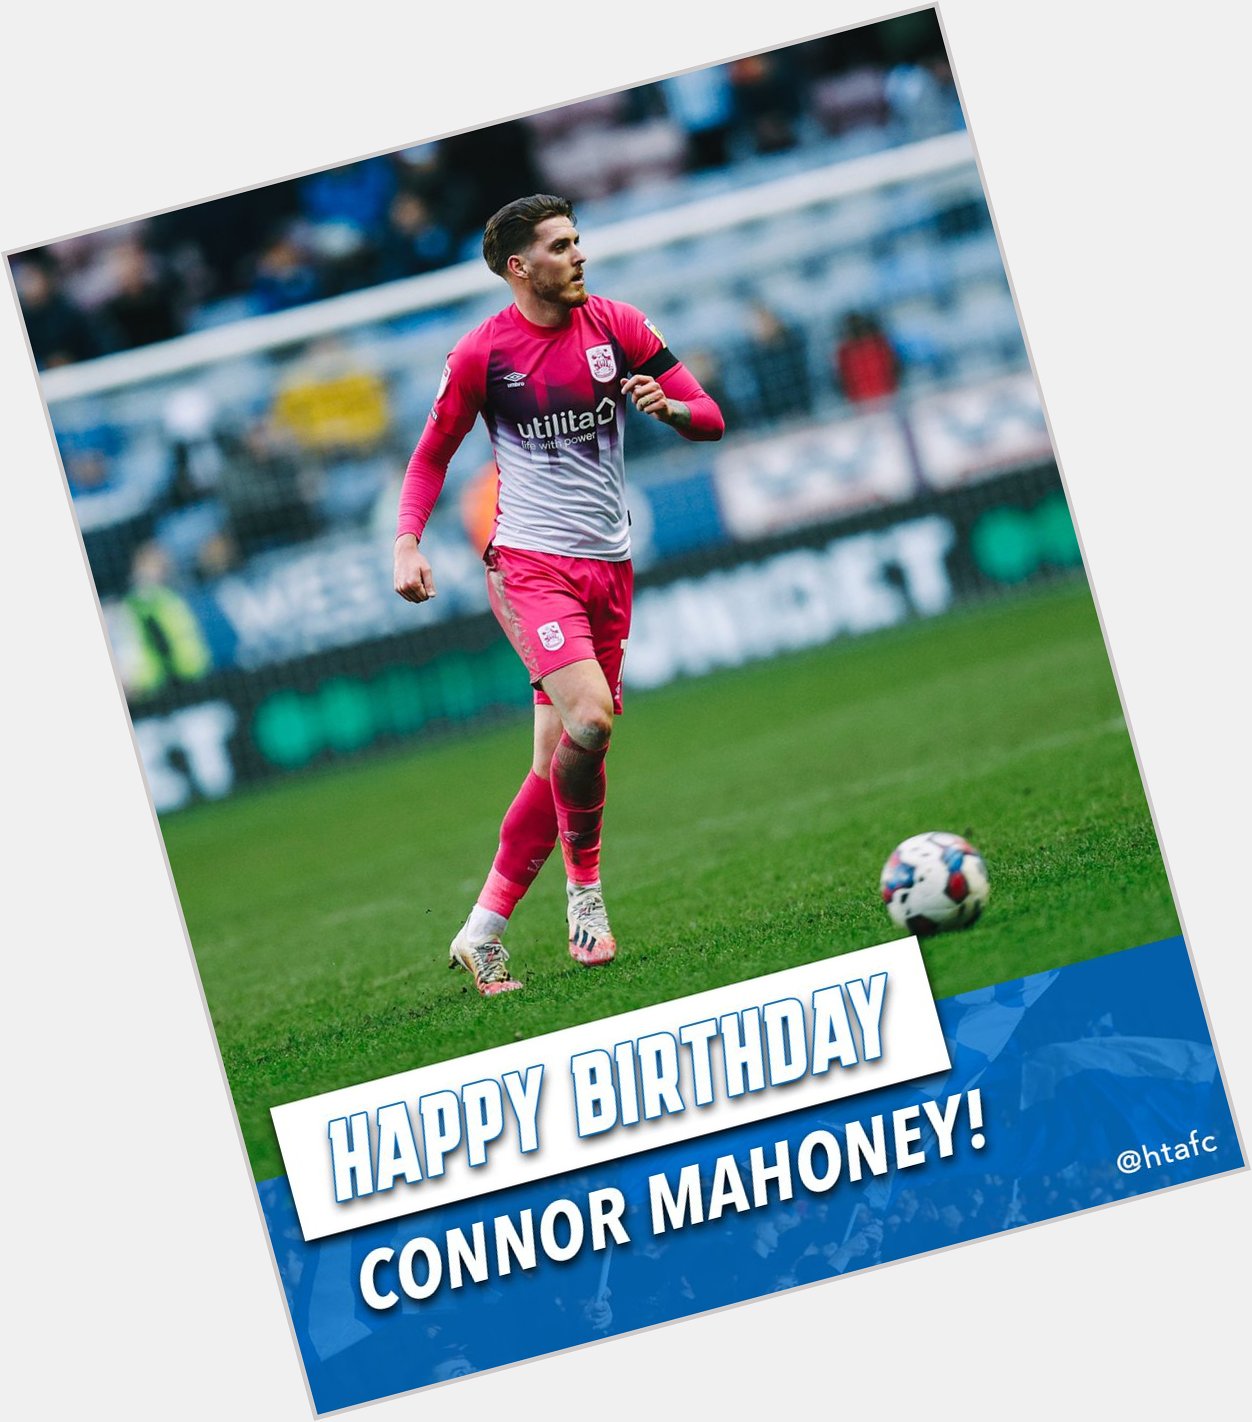  Happy Birthday Connor Mahoney!

We hope you have a brilliant day  